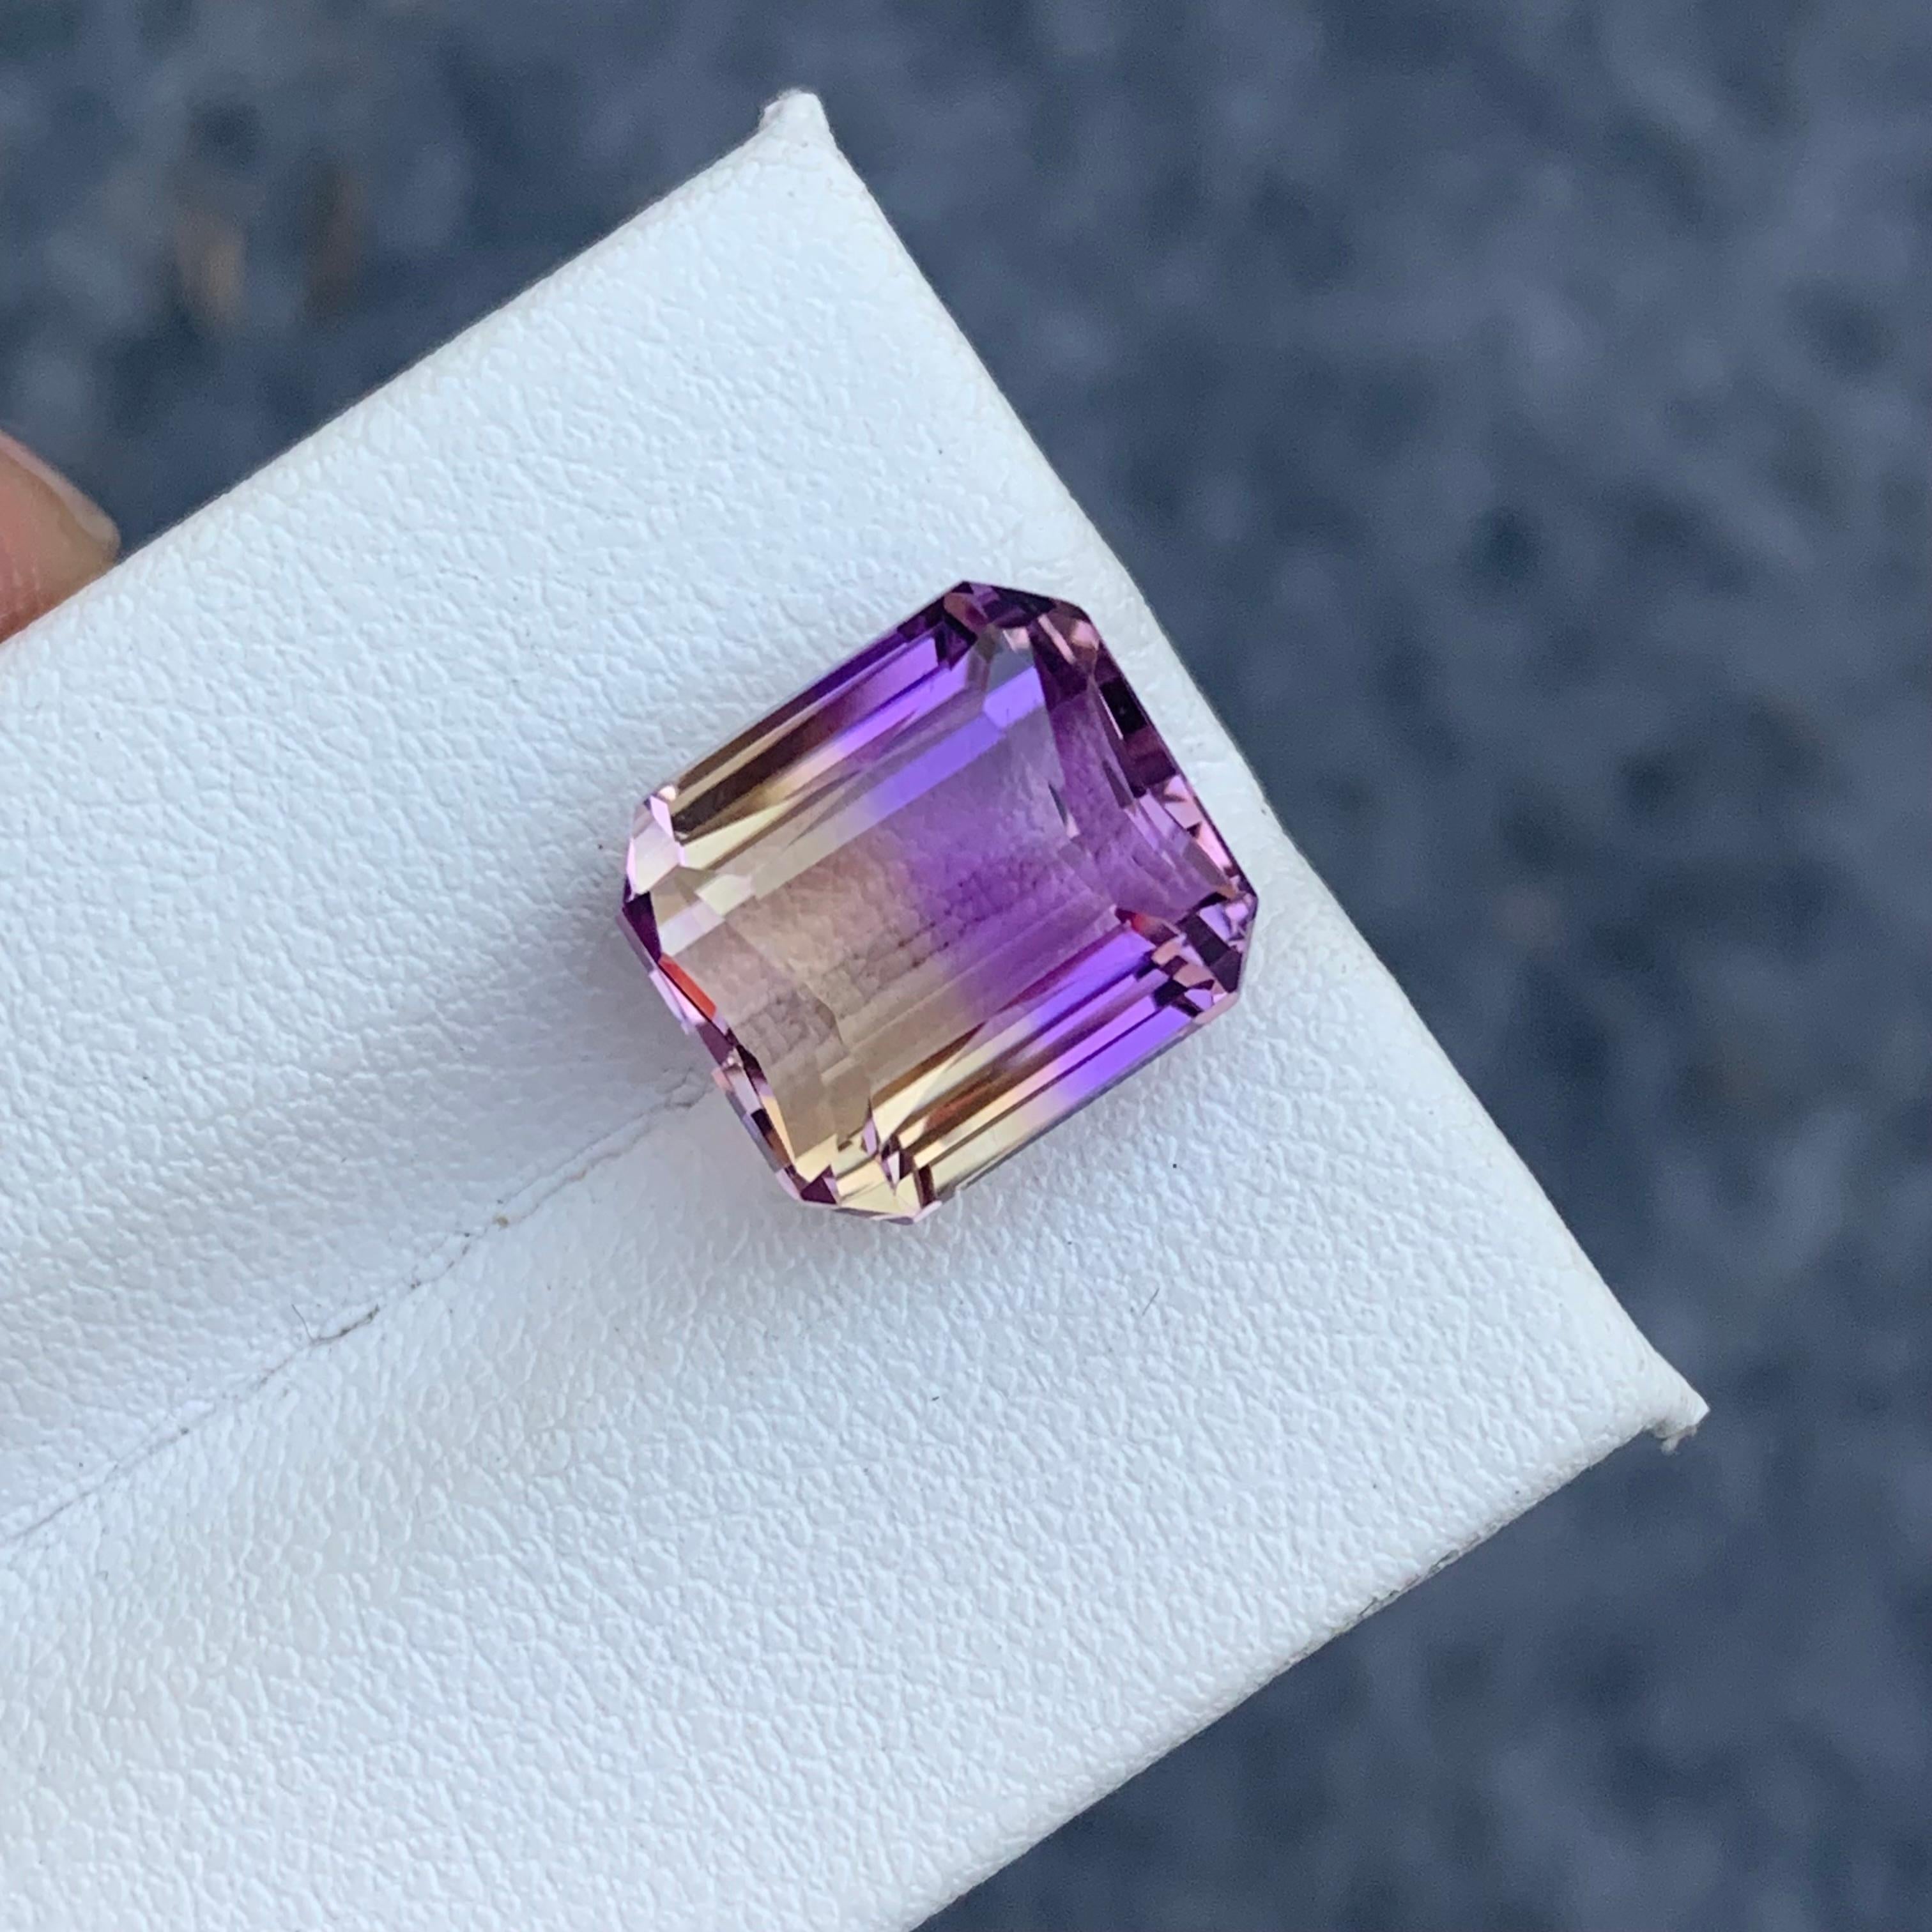 Faceted Ametrine 
Weight: 8.65 Carats
Dimension: 11.4x10.4x8.7 Mm
Origin: Brazil
Sjape: Emerald
Color: Purple & Yellow
Clarity: Eye Clean
Certificate: On Demand
For those born in the month of February, you've been graced with amethyst as your